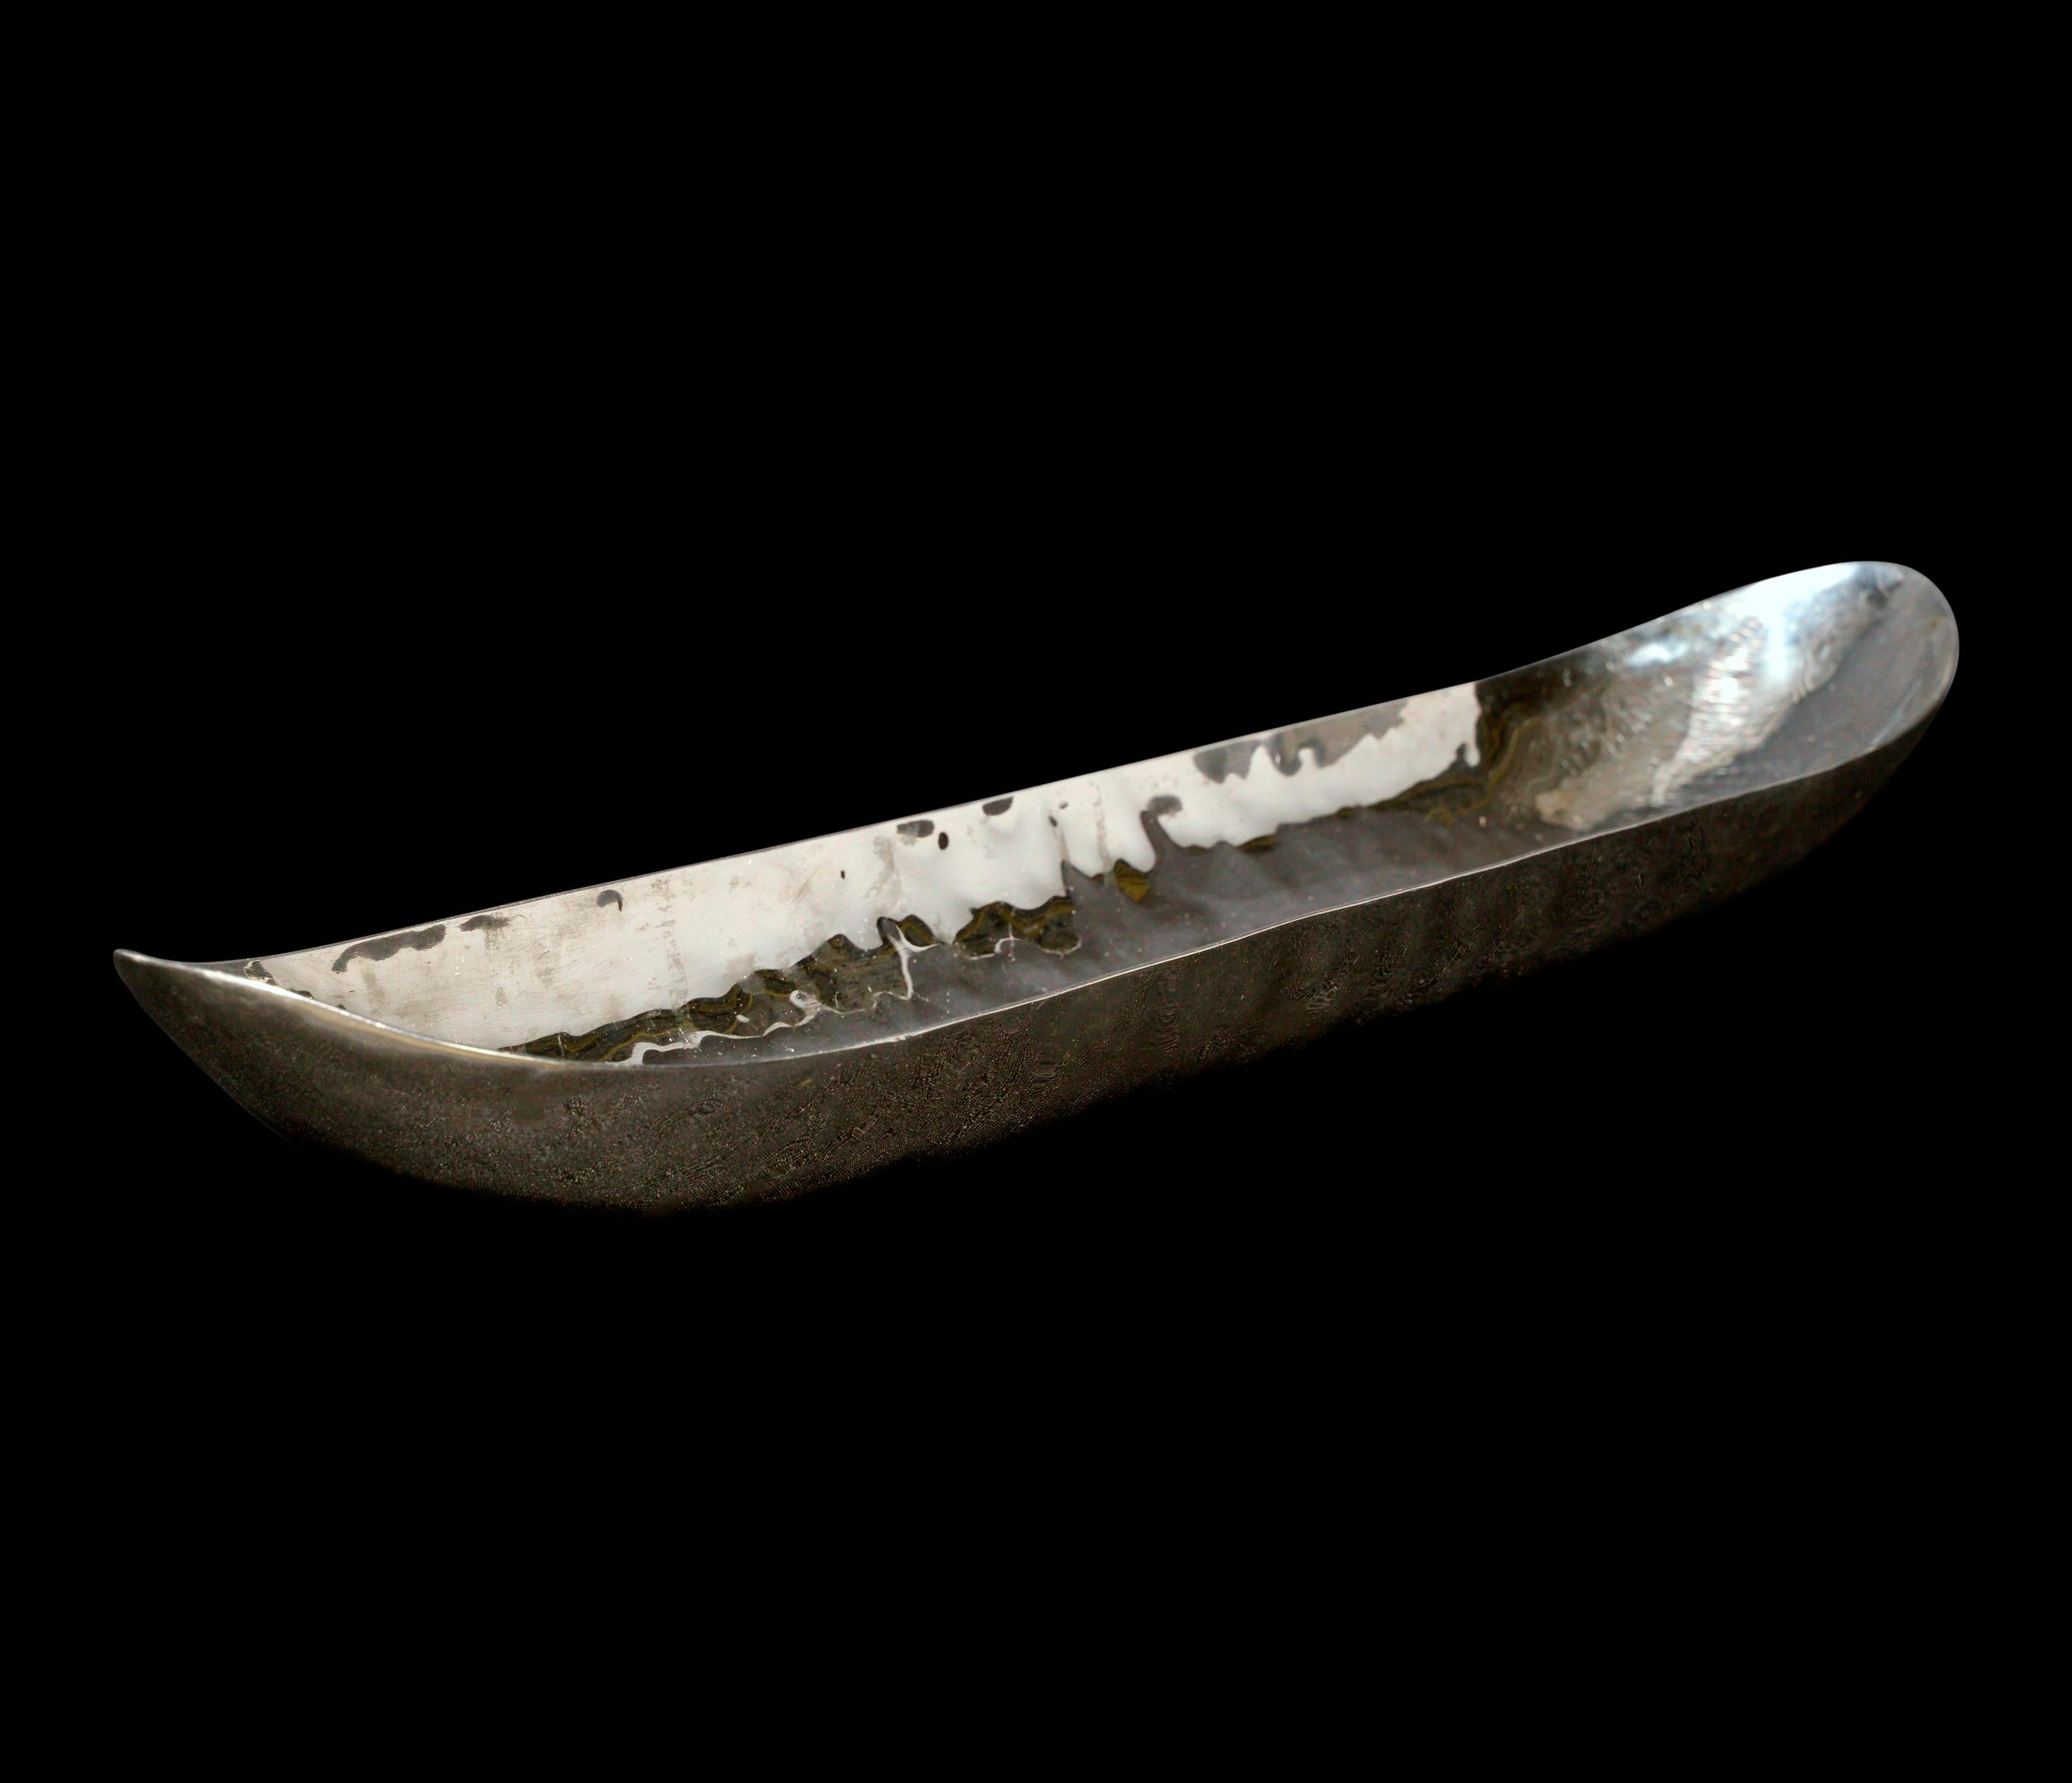 Retrieved from one of the NYC Waldorf Astoria's many unique restaurants. This is an elongagated stainless steel serving dish featuring a hammered texture. Manufactured by Zieher. Zieher produces luxury tabletop and buffet accessories for 5 star